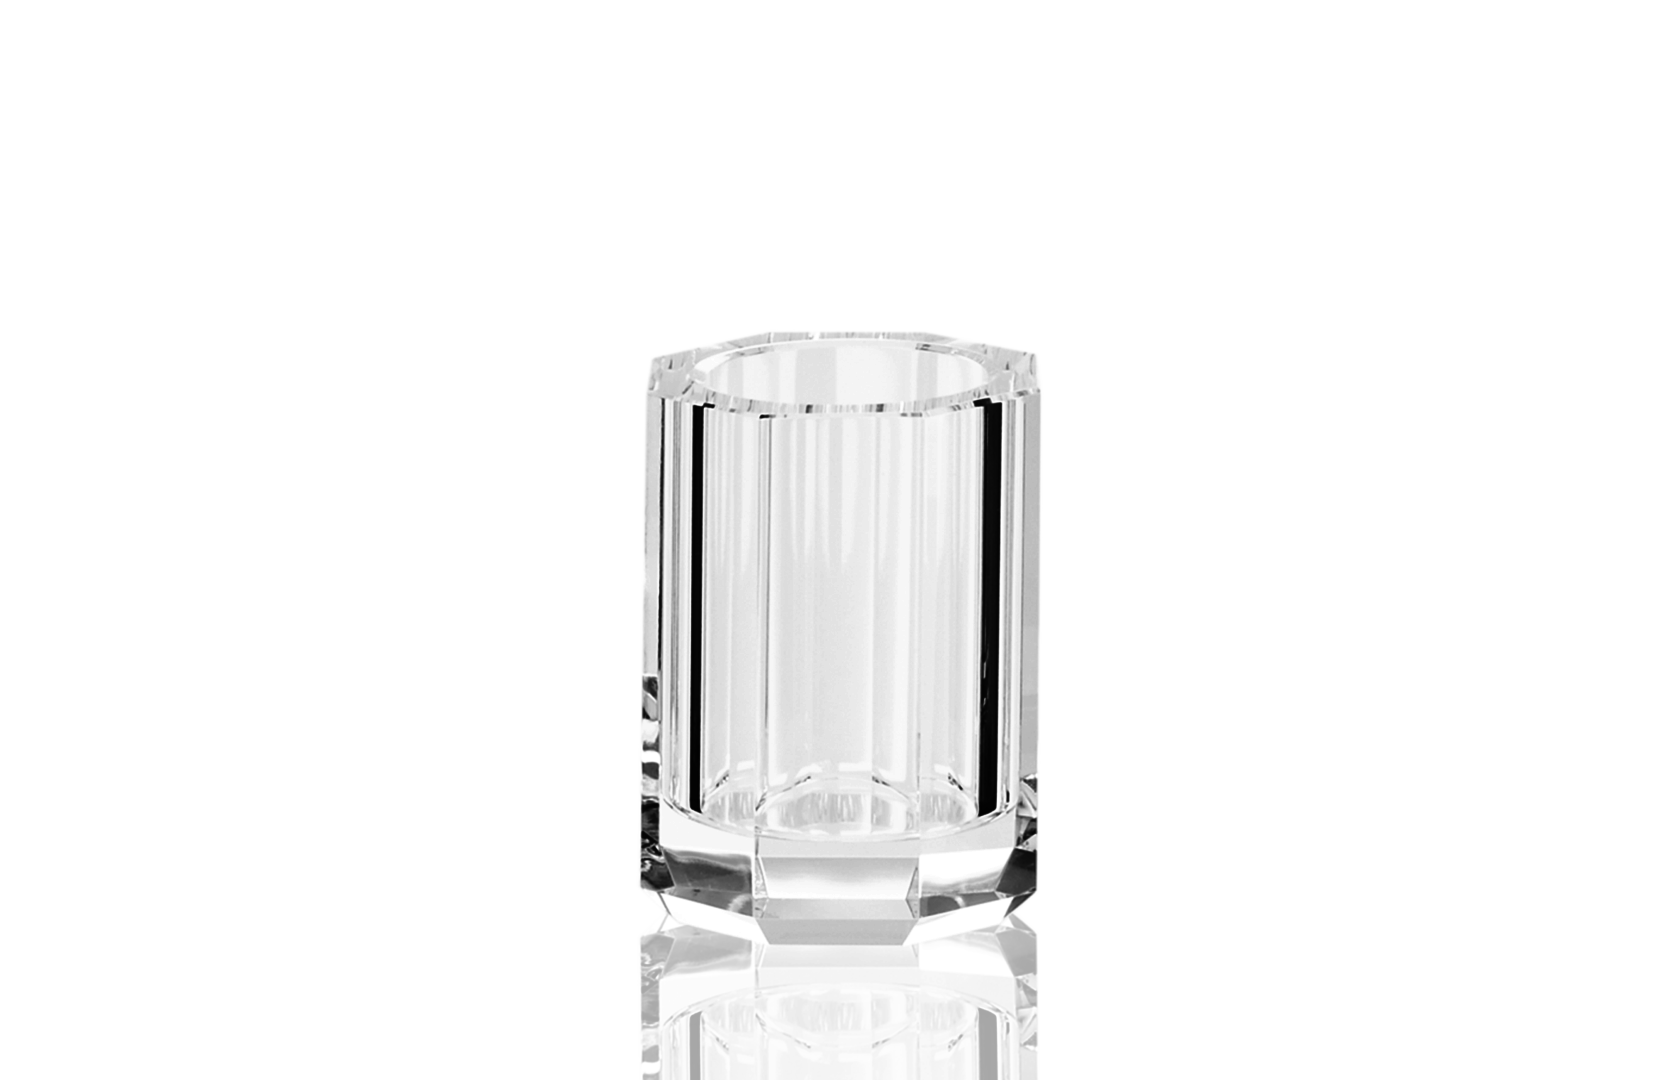 Kristall tumbler / toothbrush holder crystal clear